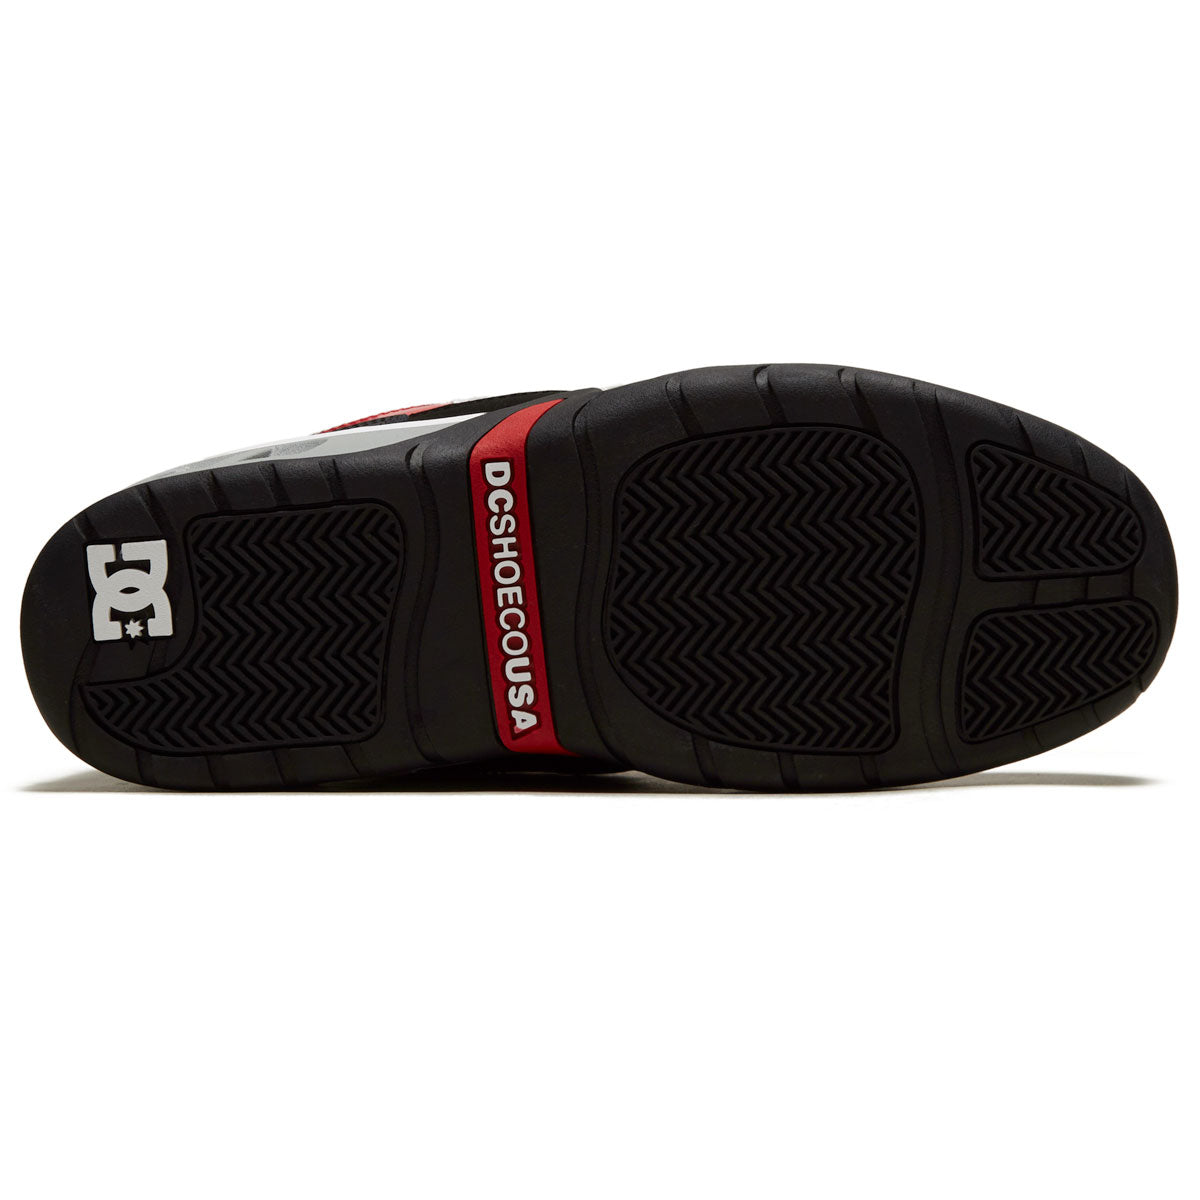 DC x Ben G Truth Shoes - Black/White/Red image 4